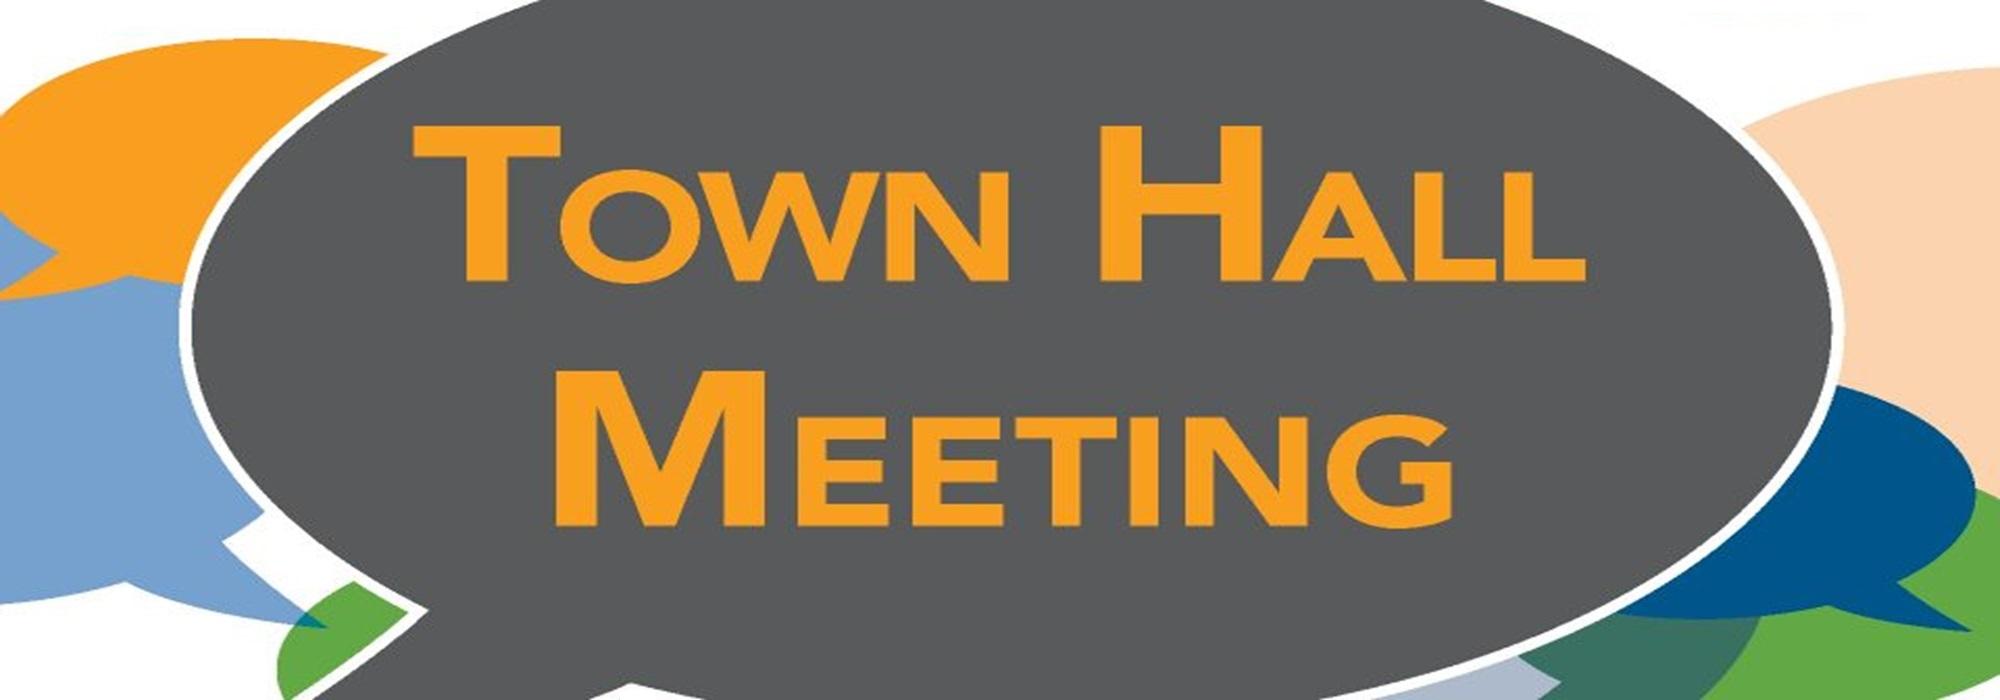 Graphic with orange text "Town Hall Meeting" in a gray speech bubble